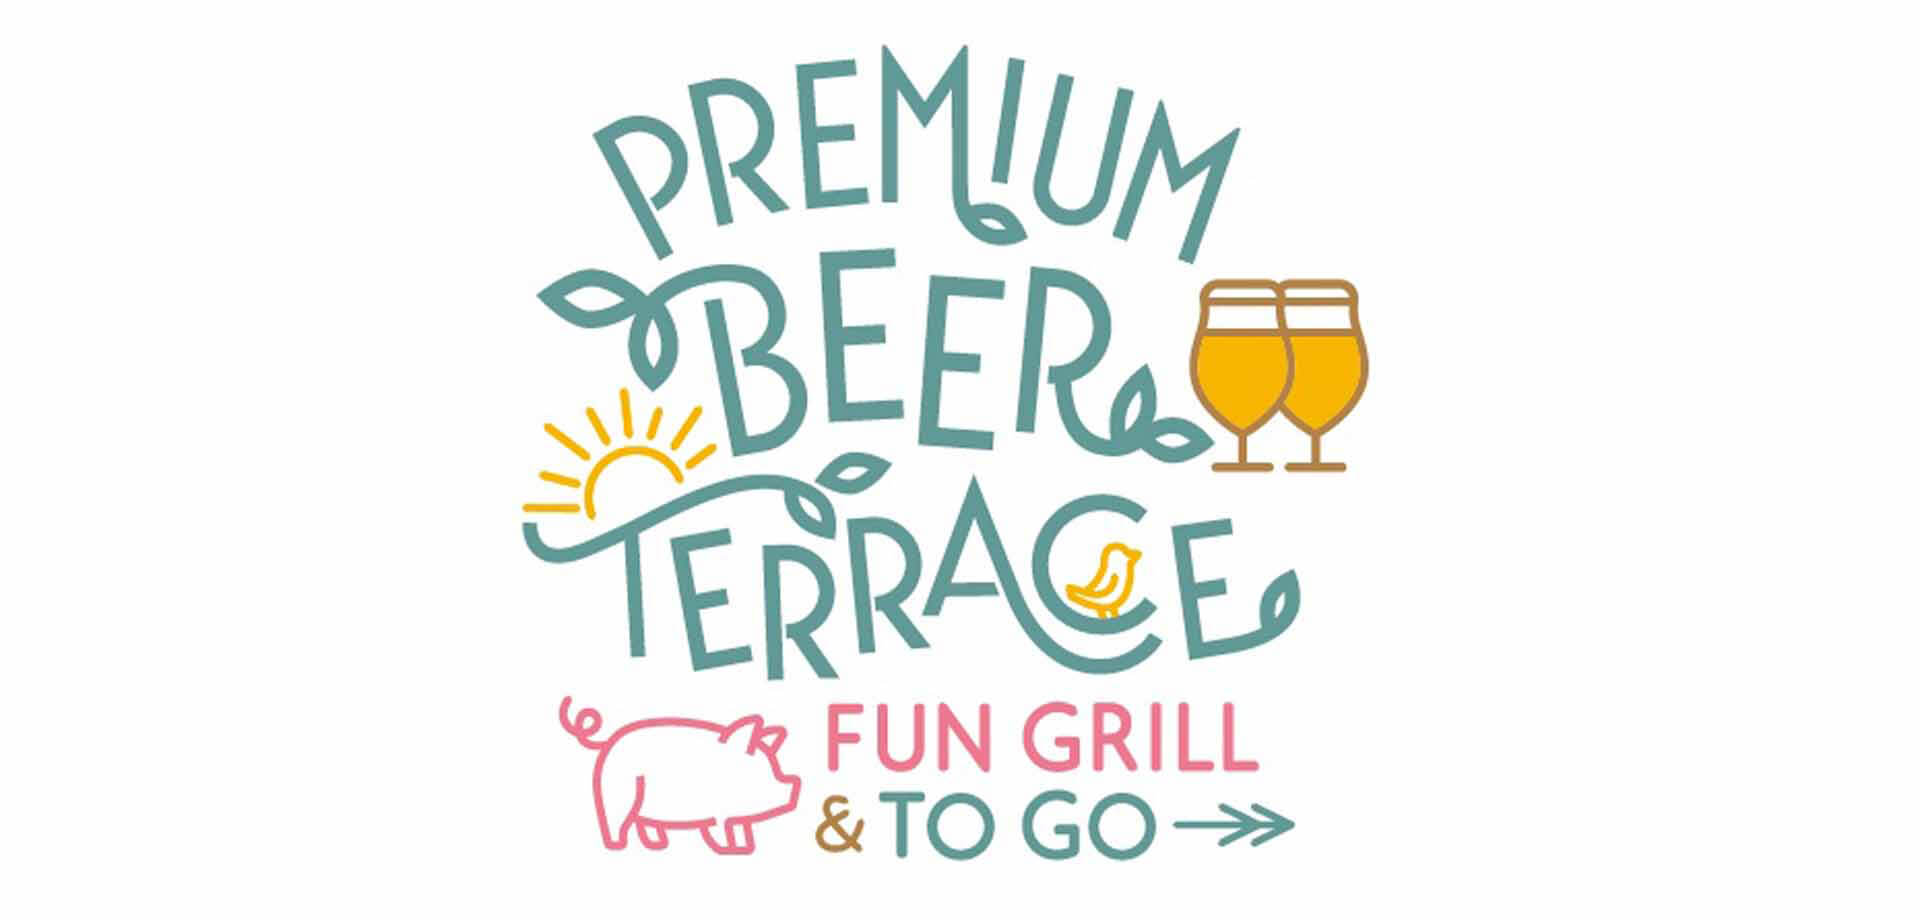 PREMIUM BEER TERRACE FUN GRILL ＆ TO GO！ 二子玉川ライズ ビールイベント